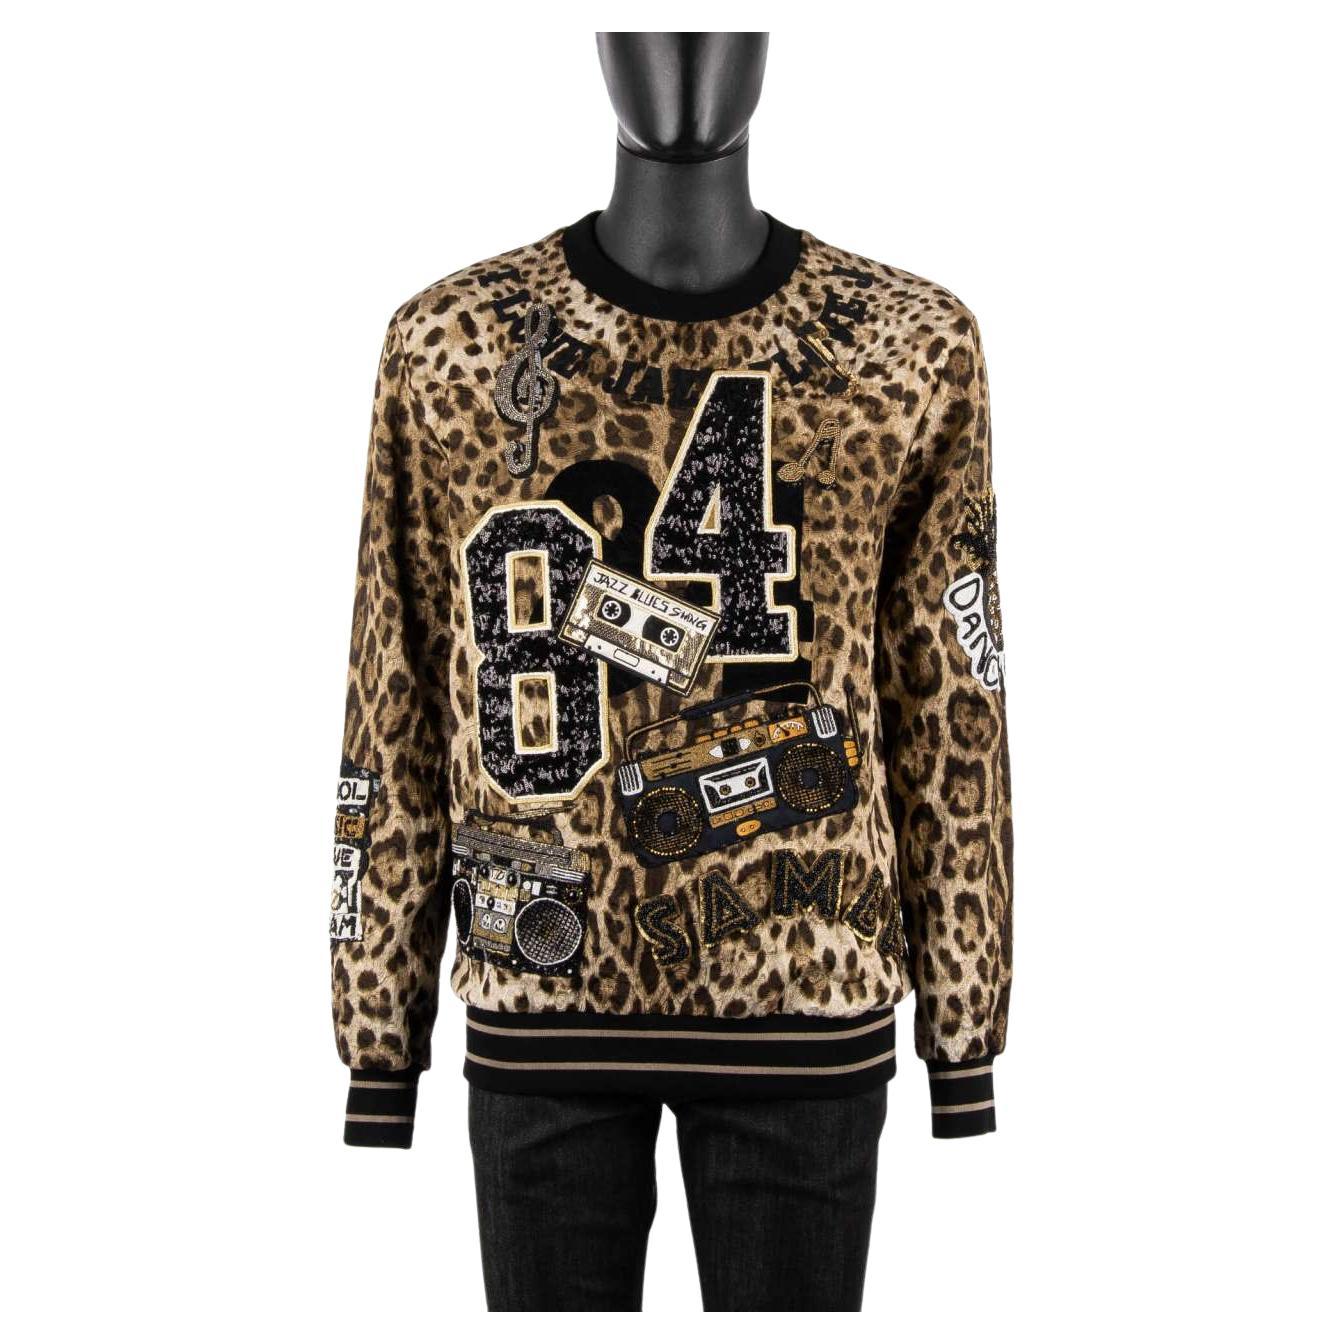 D&G Leopard Printed Sweater with Jazz Samba Music Embroidery Black Brown 46 For Sale